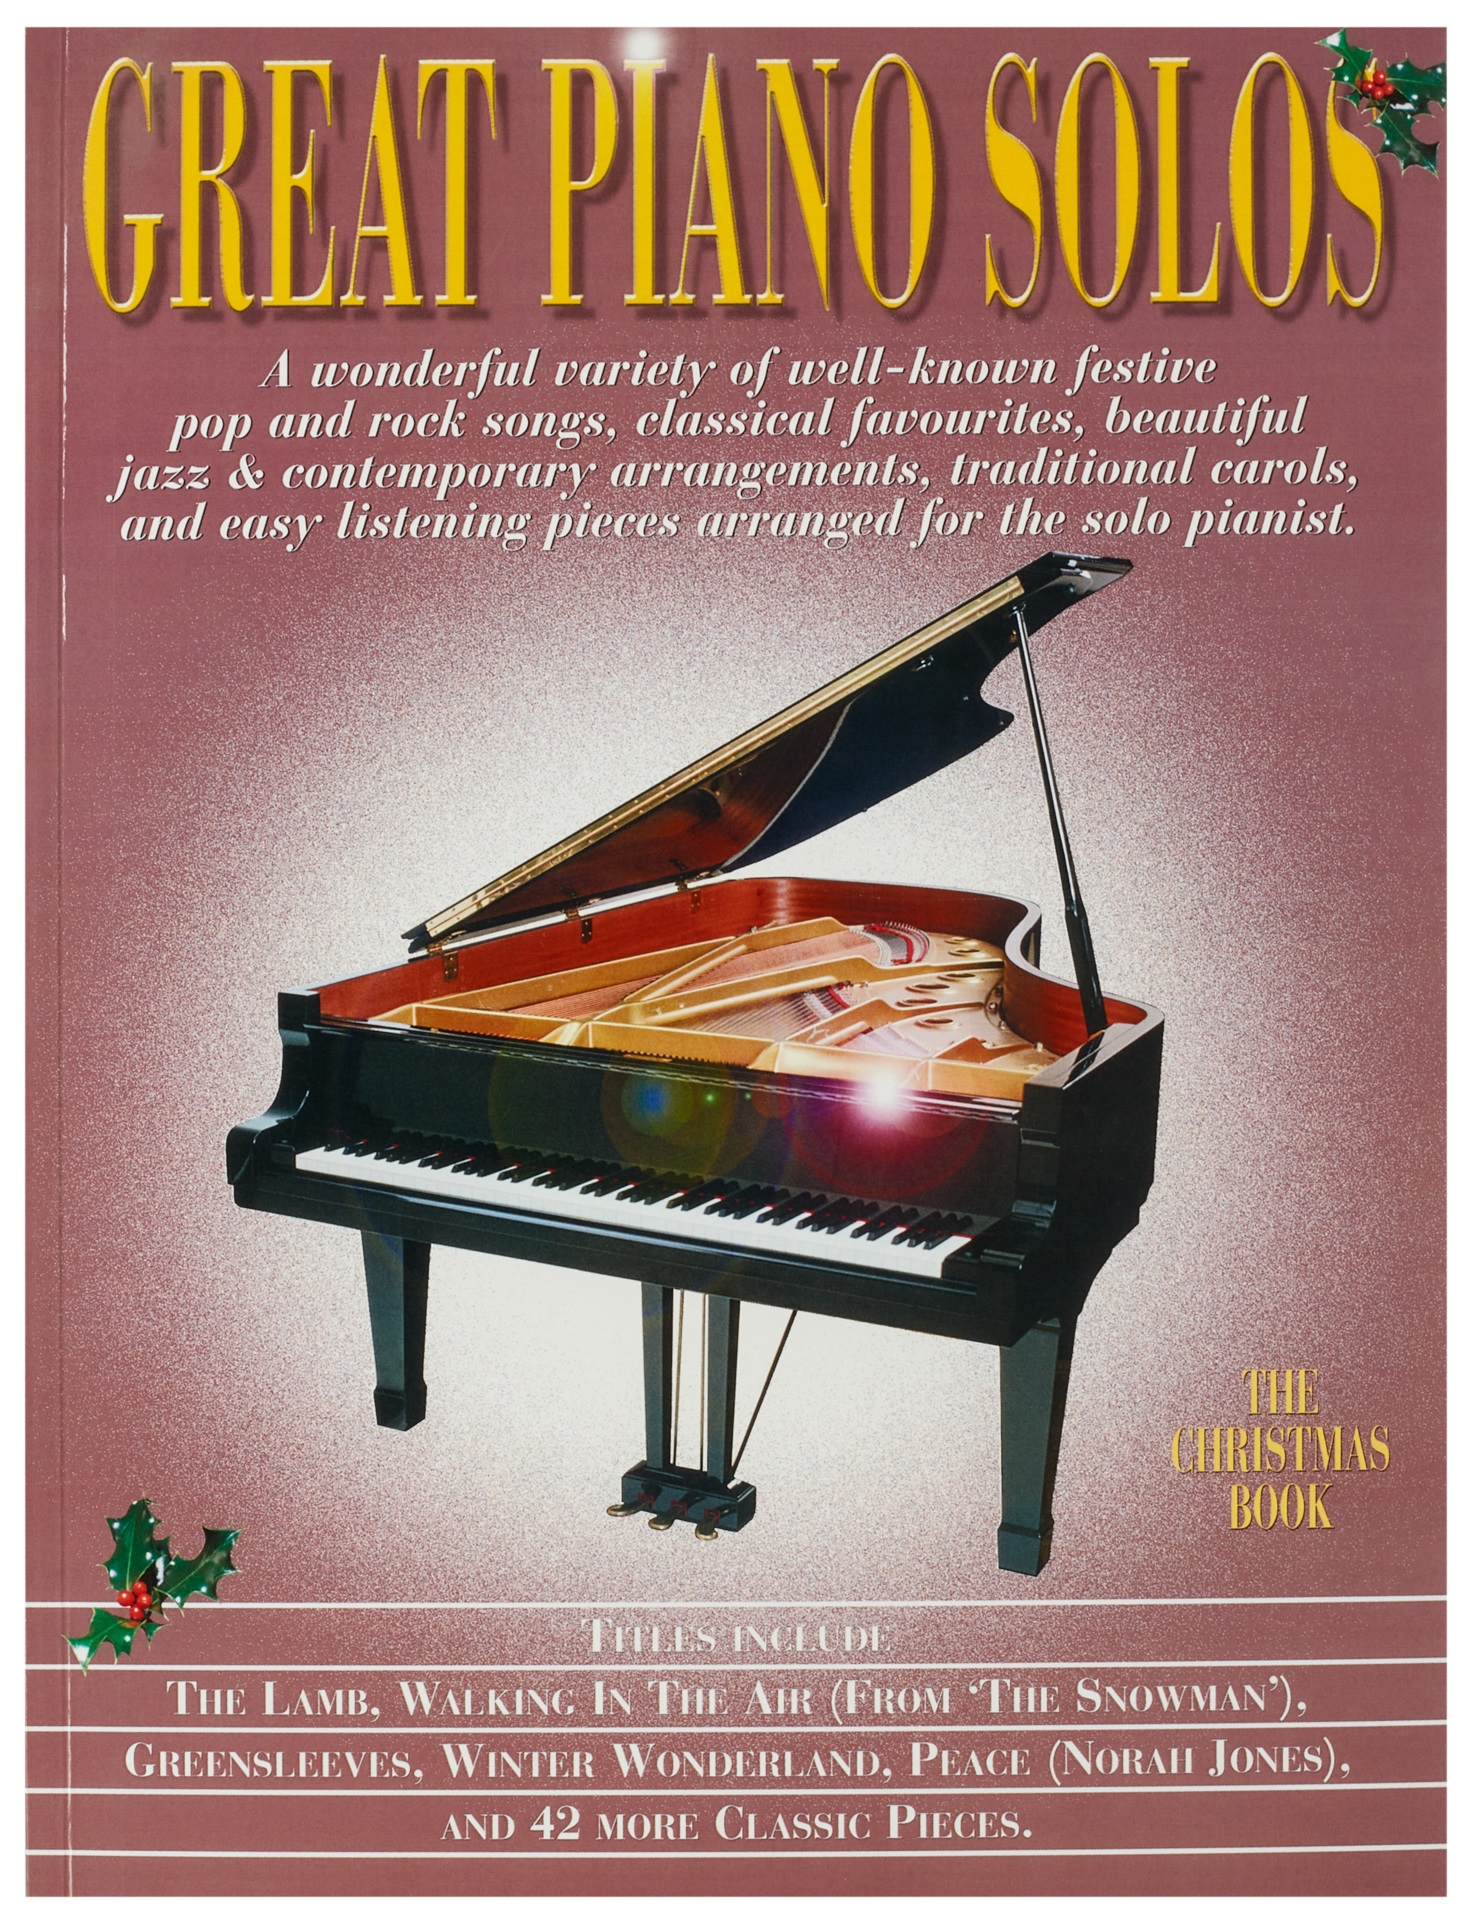 Fotografie MS Great Piano Solos - The Christmas Book